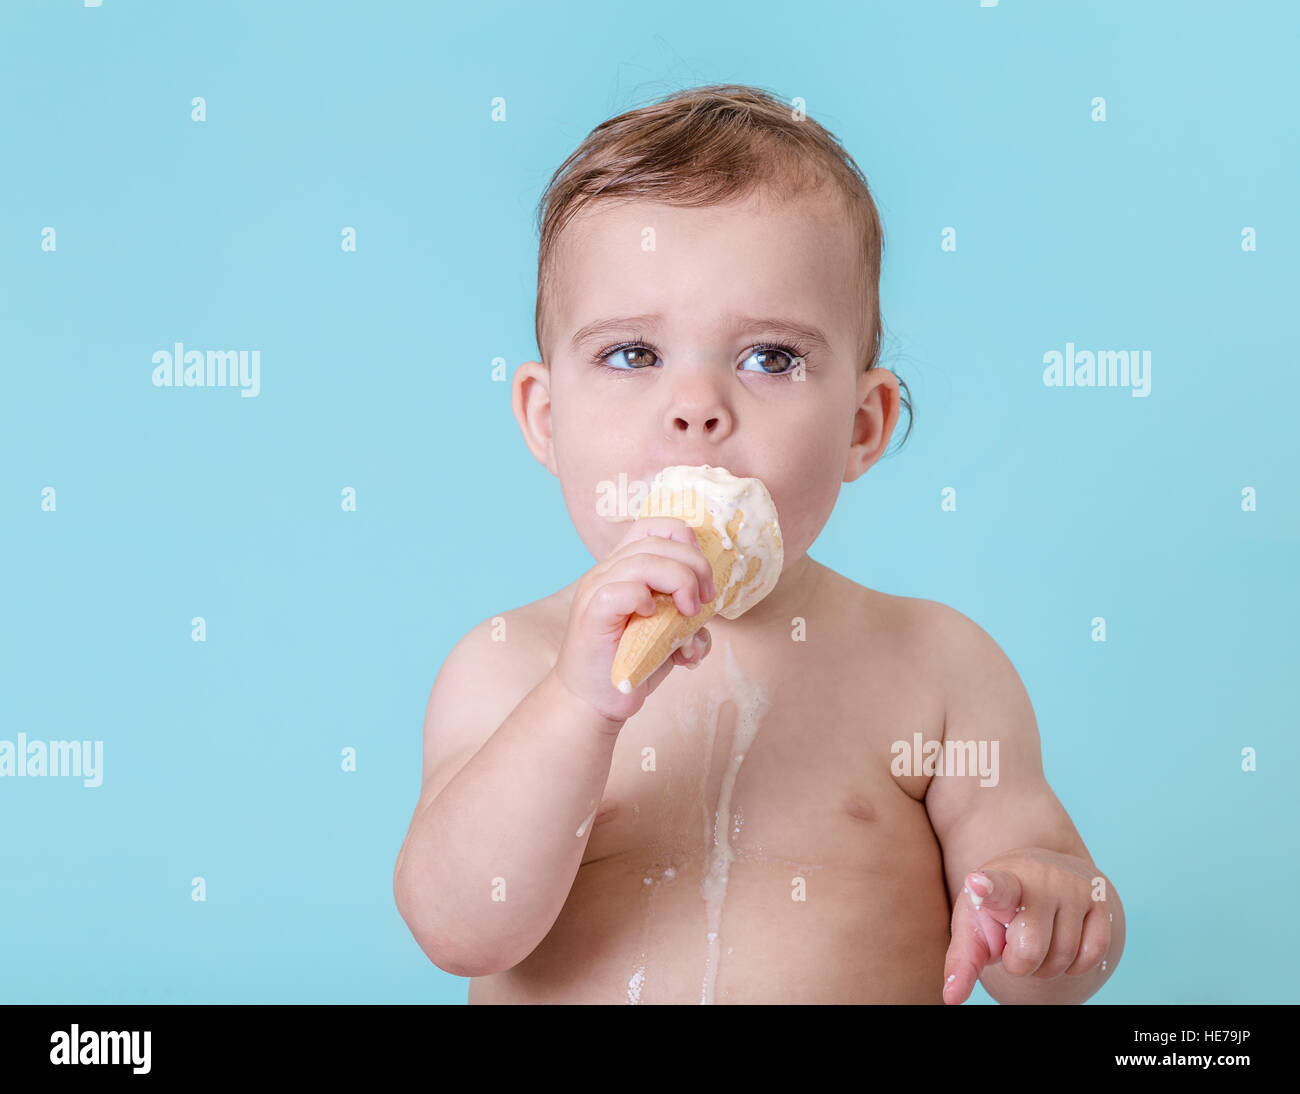 Pretty Toddler Girl with Melted Ice Cream on Plain Blue Background Stock Photo